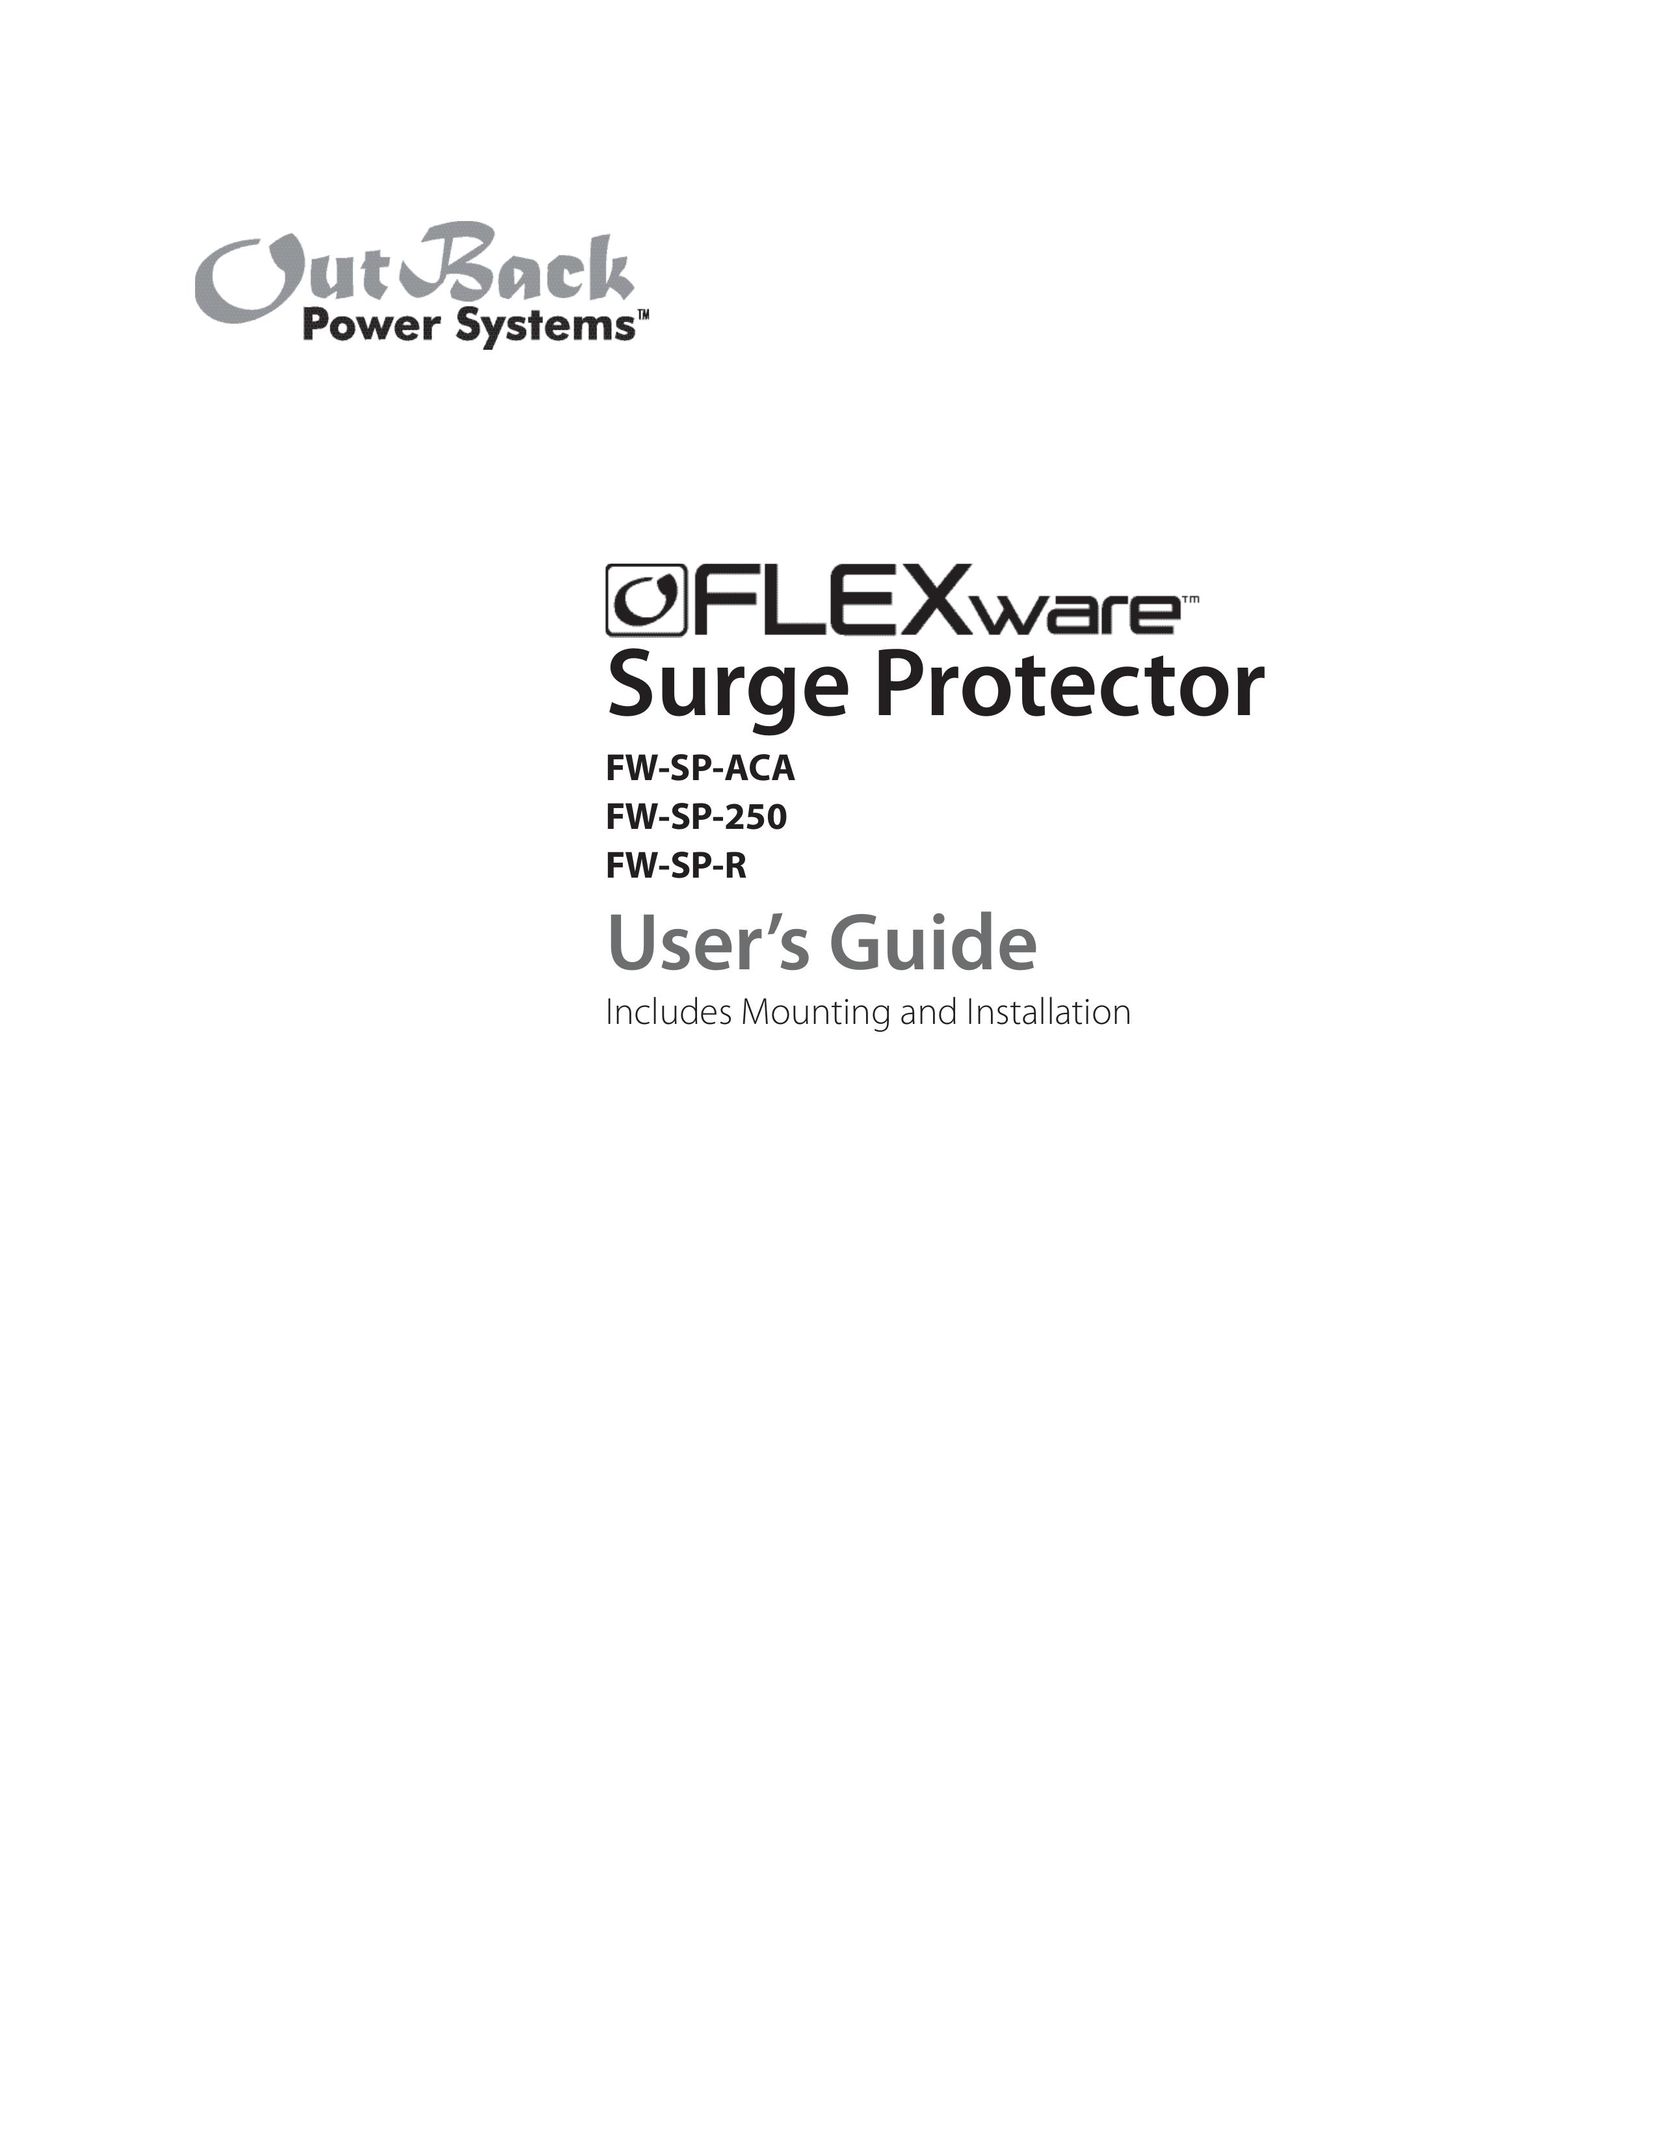 Outback Power Systems FW-SP-250 Surge Protector User Manual